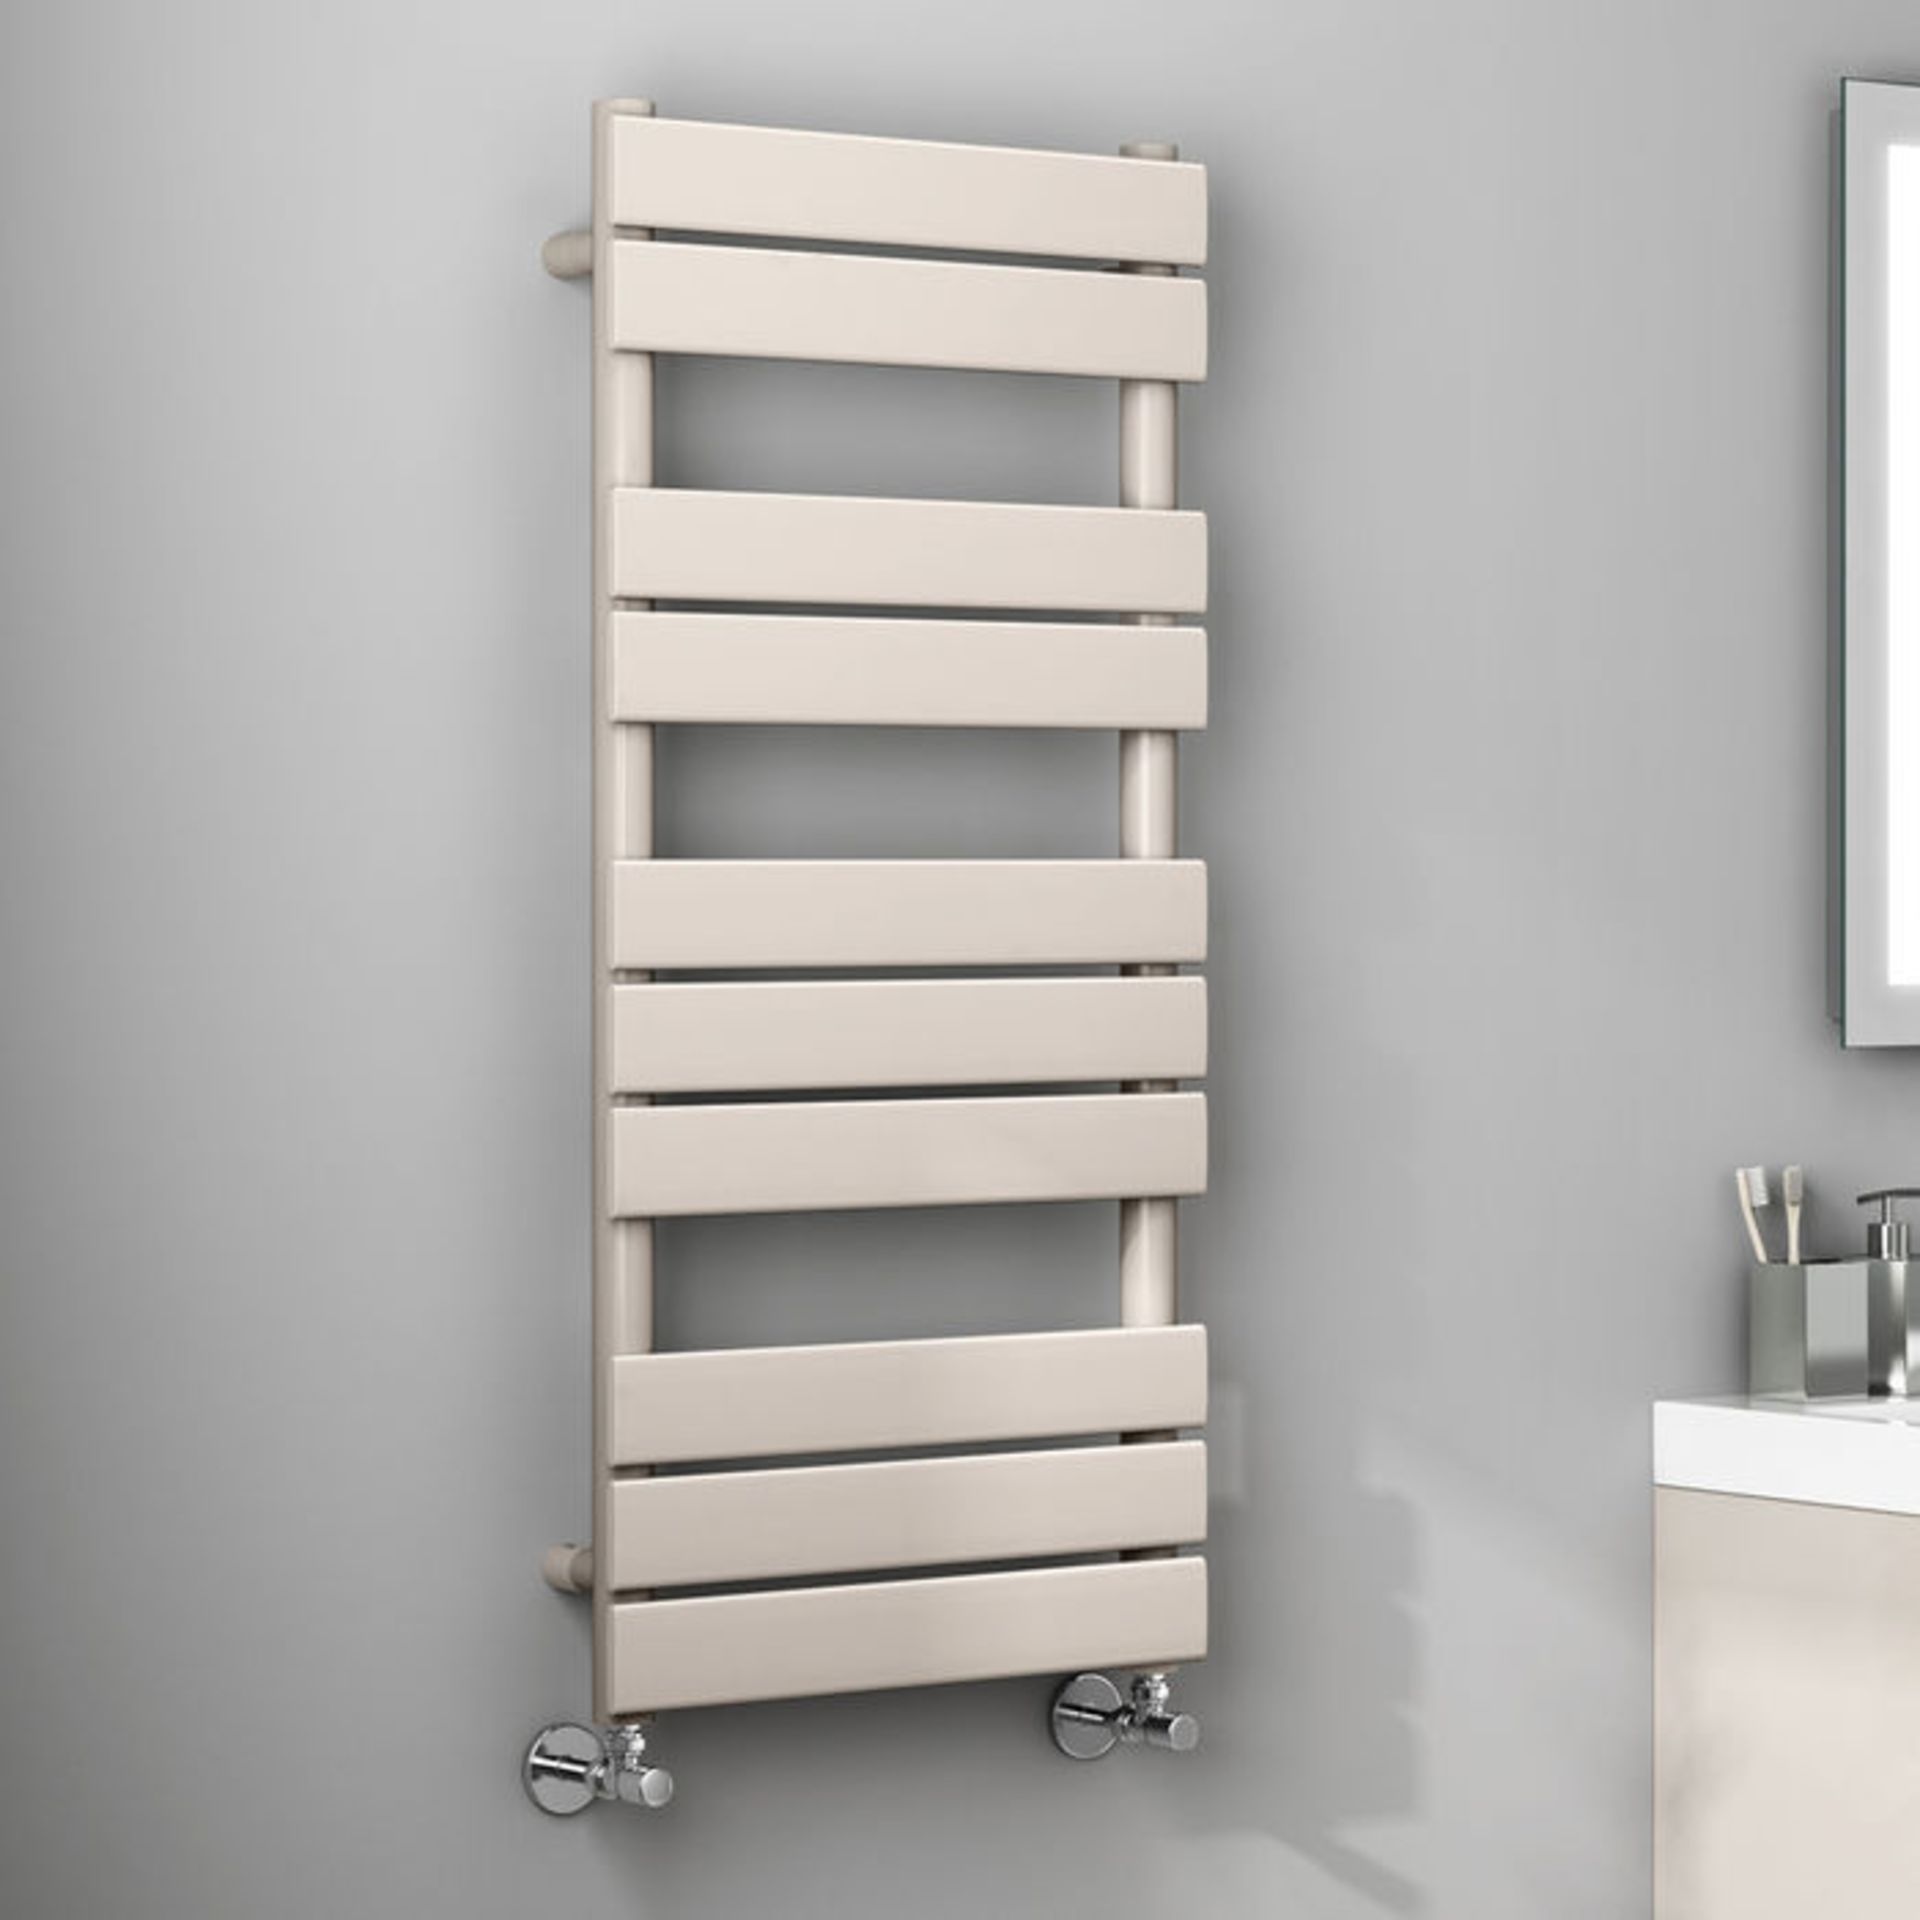 (W11) 1000x450mm Latte Flat Panel Ladder Towel Radiator. Made from high quality low carbon steel